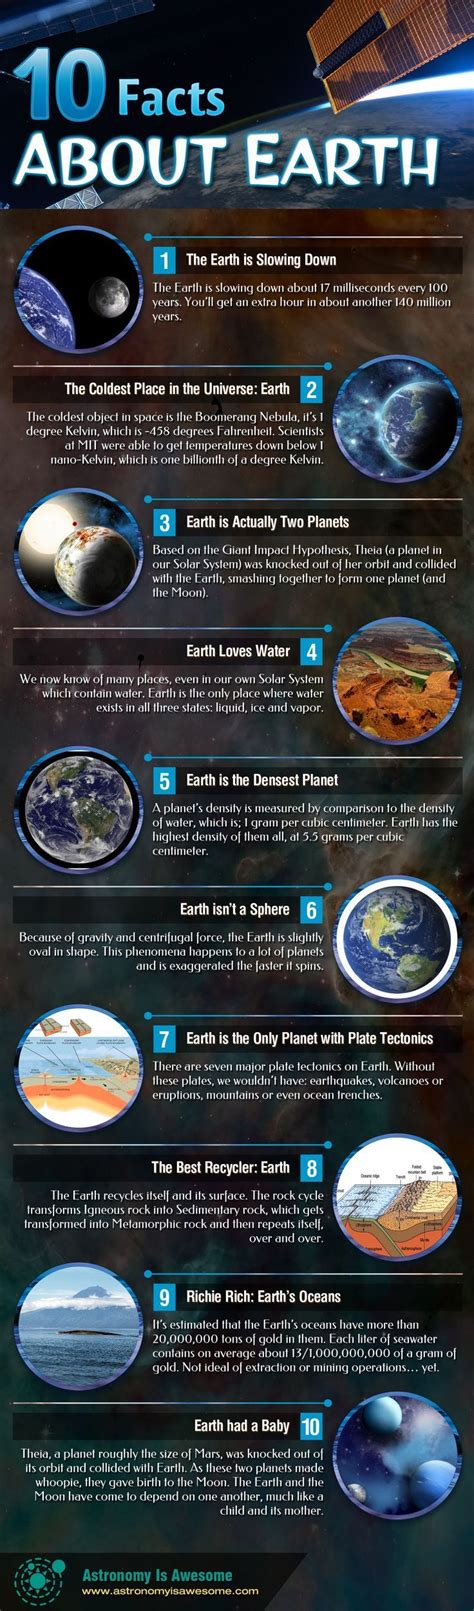 10 Facts About Earth Infographic Space Facts Earth Science Facts